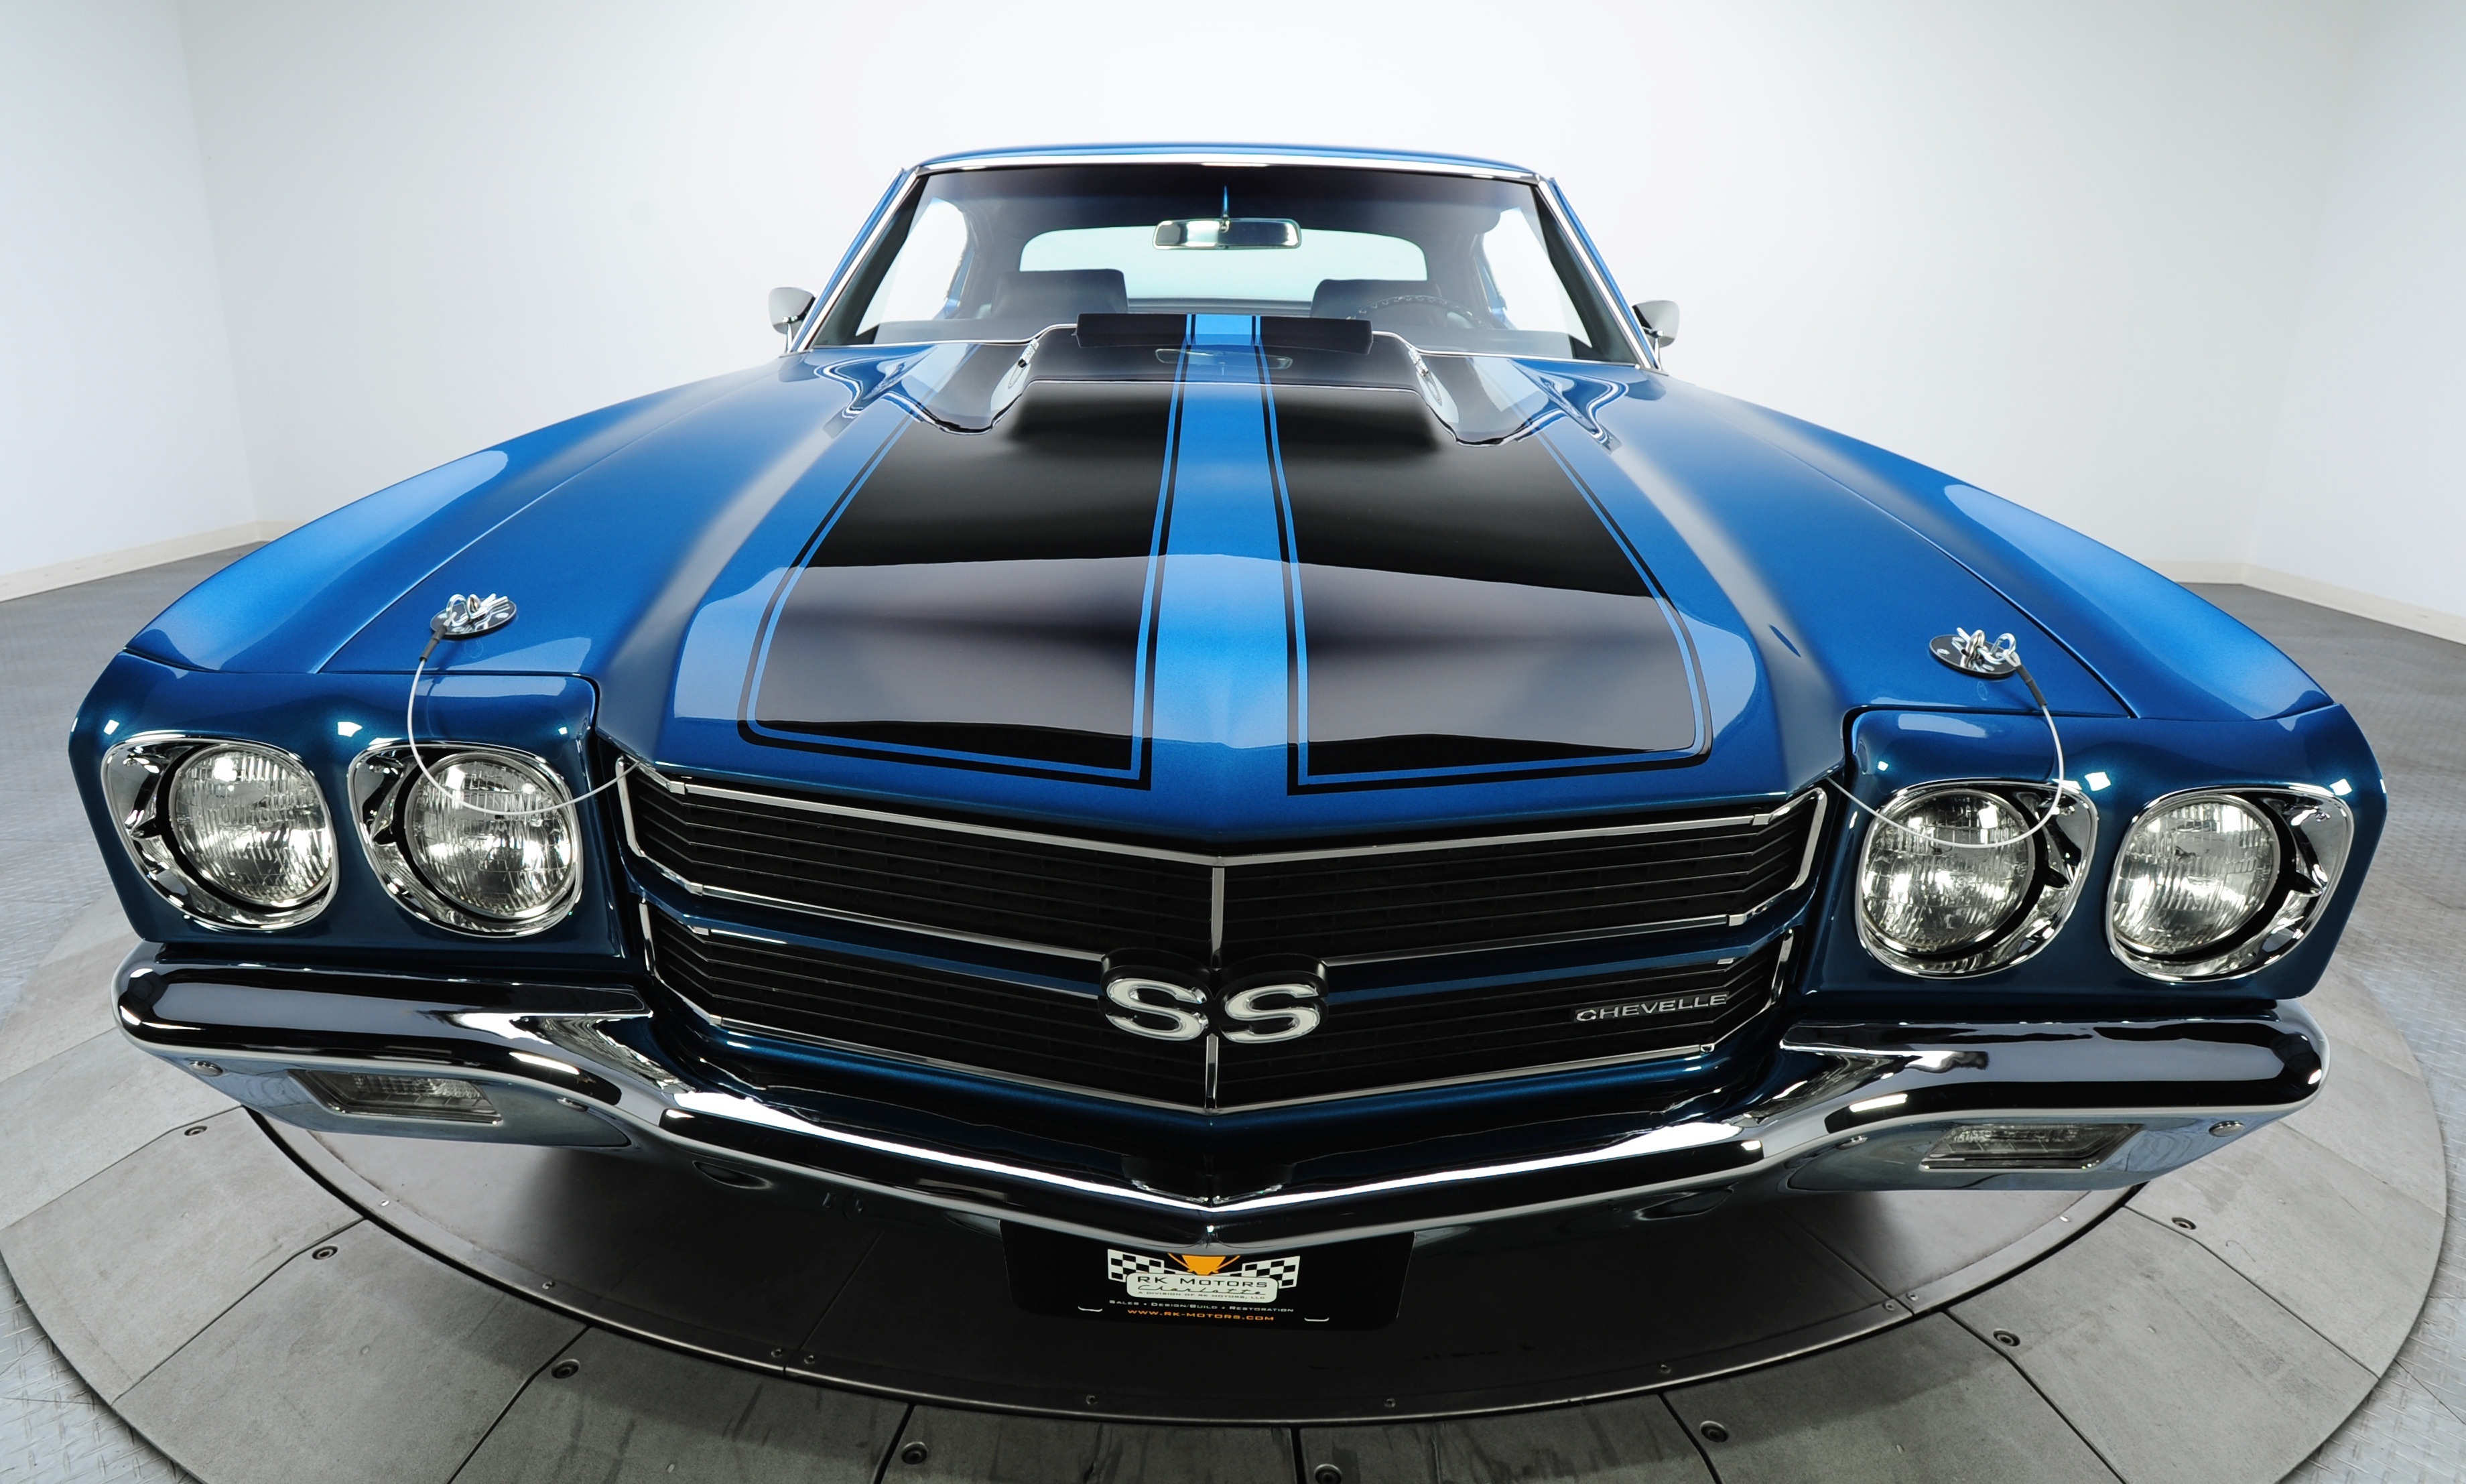 21 Chevrolet Chevelle SS HD Wallpapers Backgrounds 3680x2215